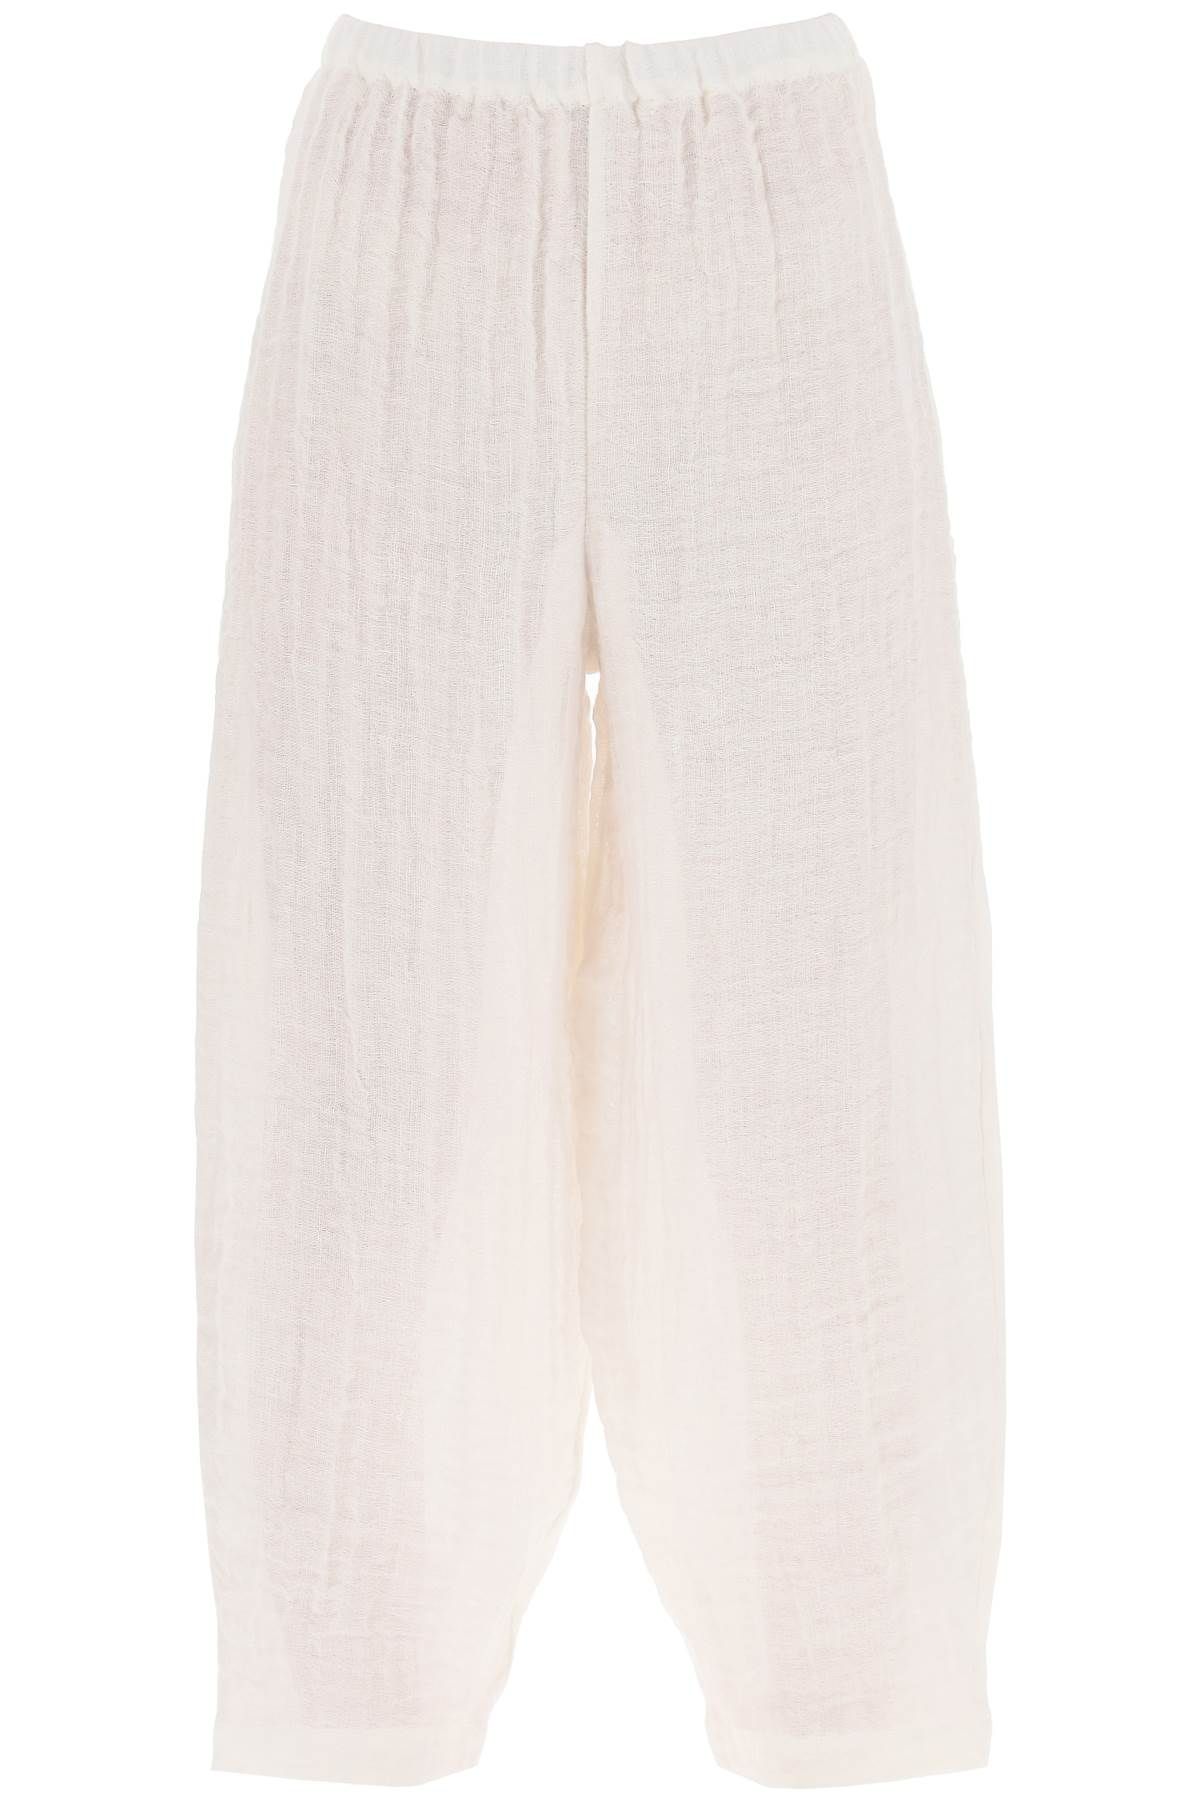 By Malene Birger BY MALENE BIRGER organic linen mikele pants for